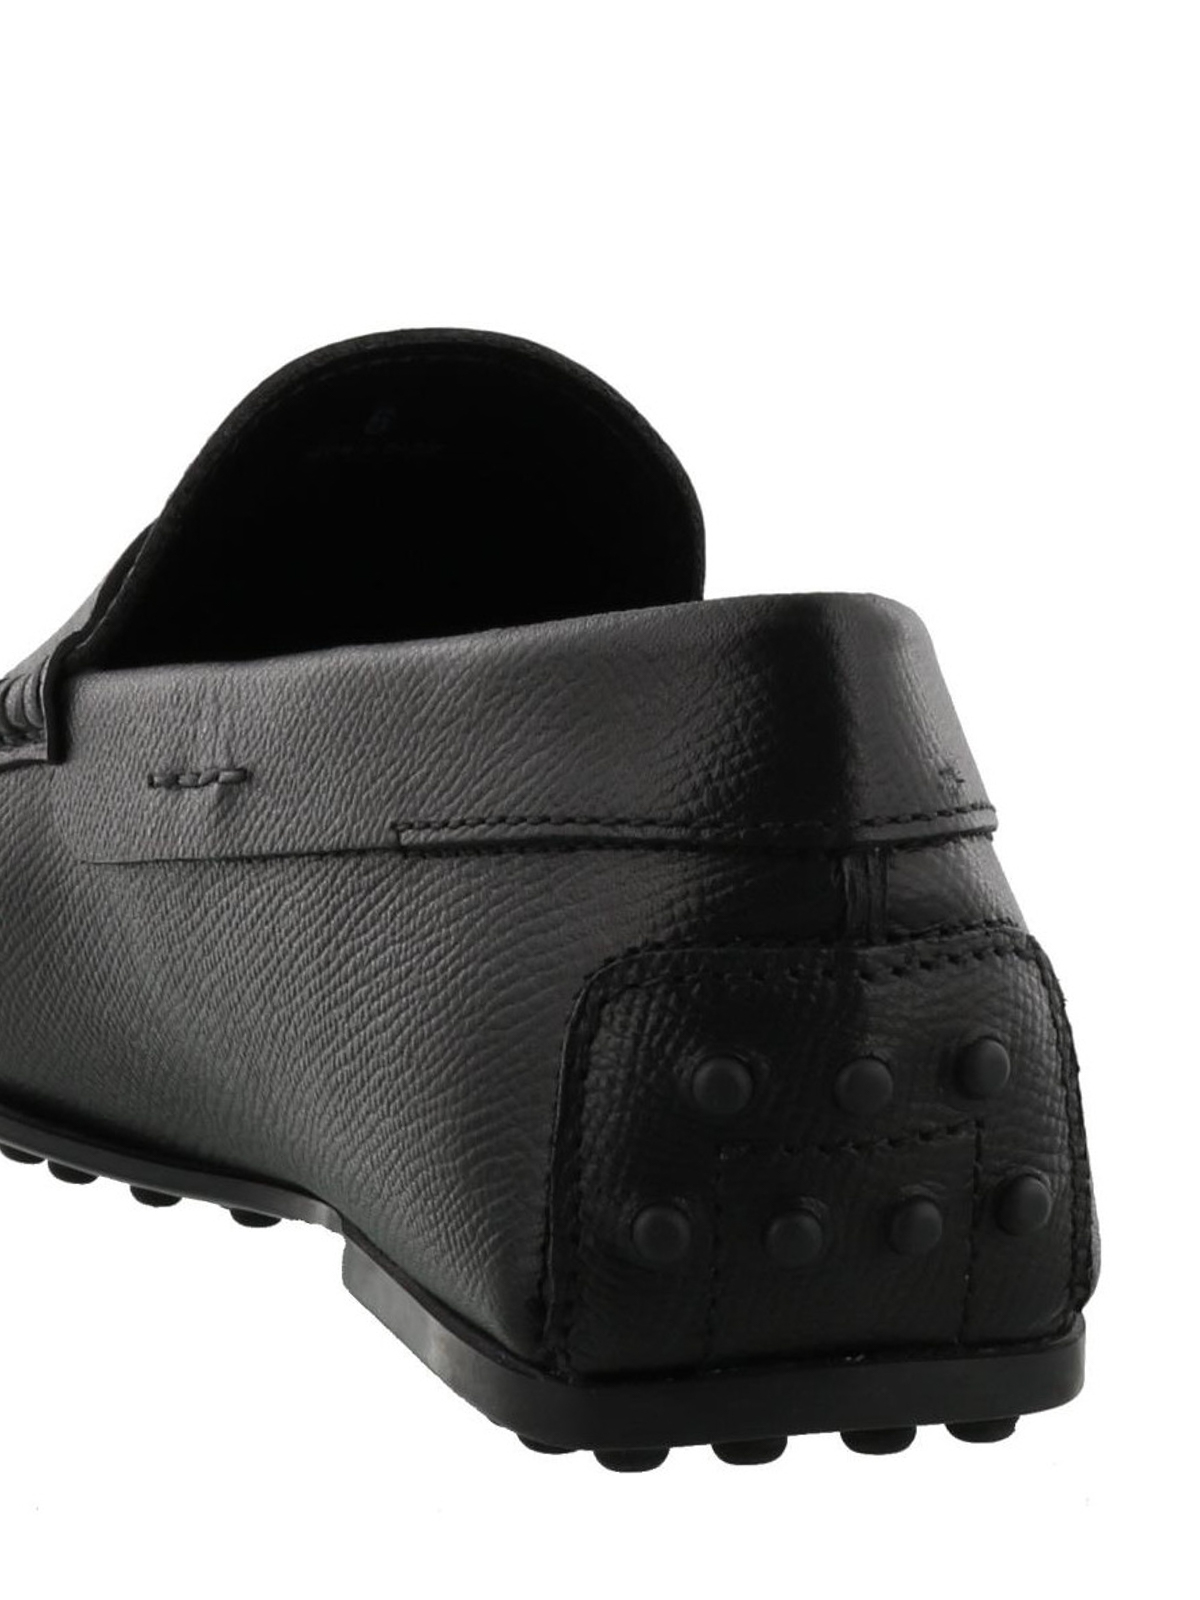 Loafers & Slippers Tod'S - City black leather loafers 